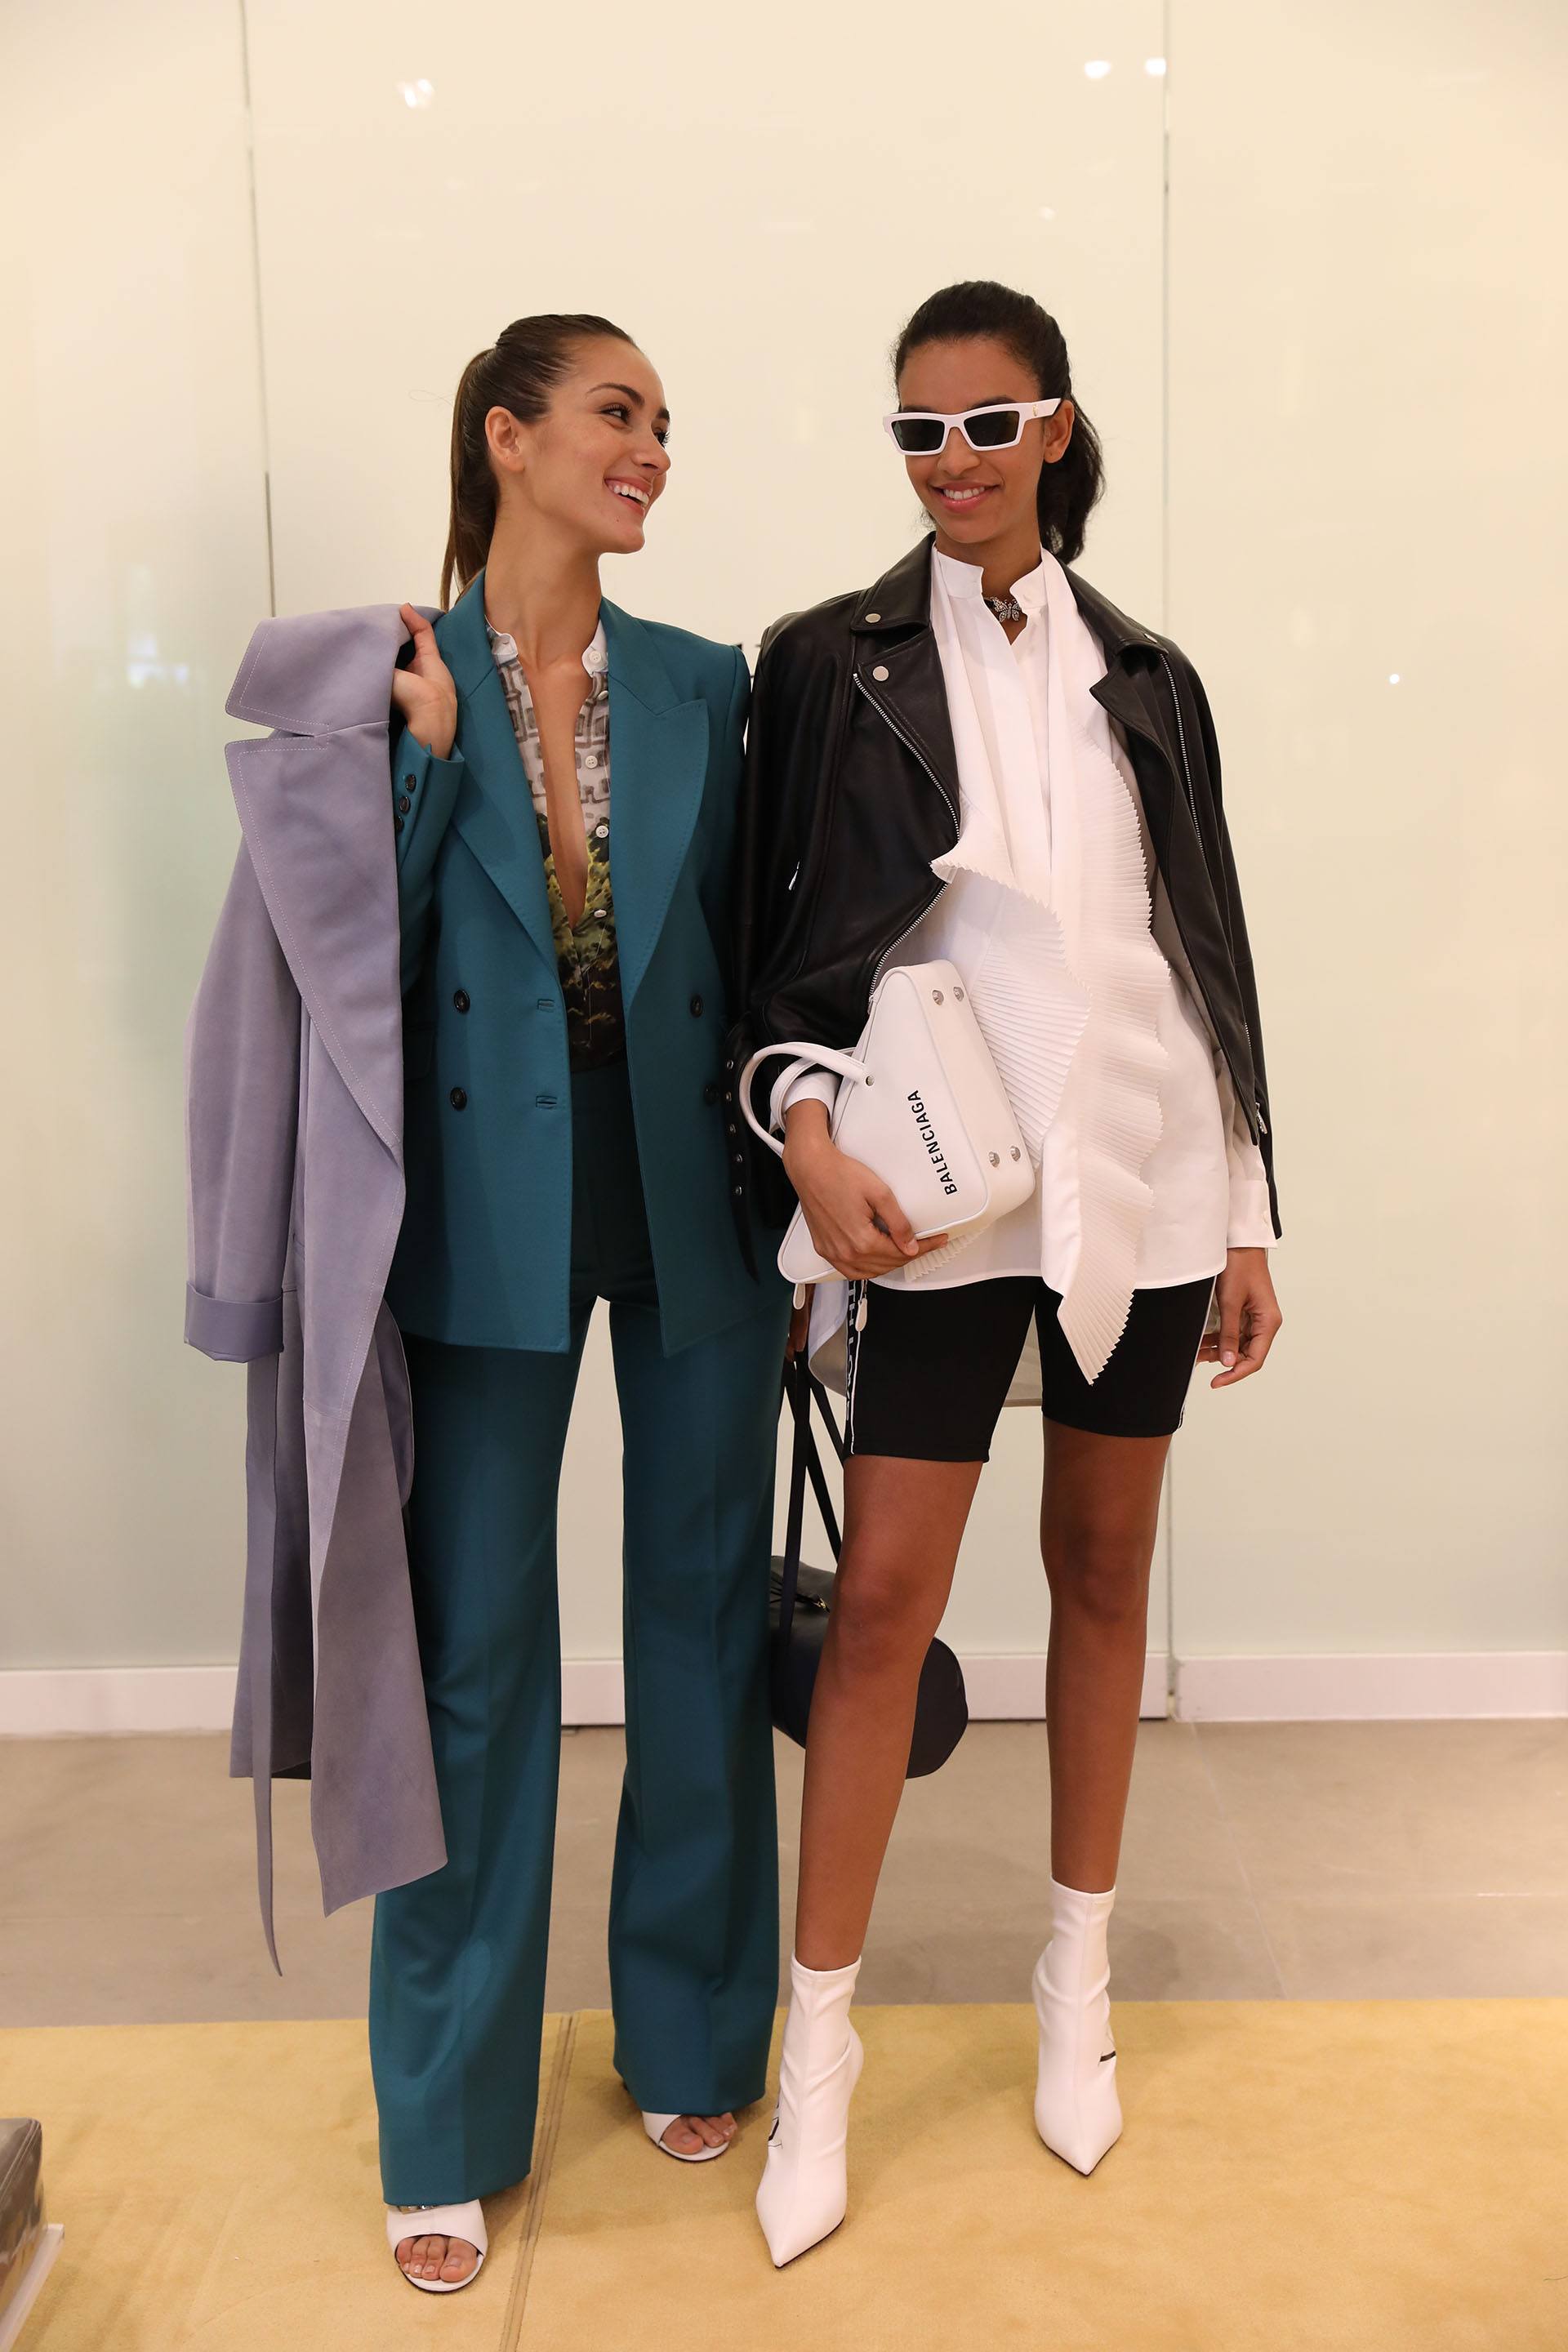 Models in the latest Spring 2019 collection from Neiman Marcus Bal Harbour